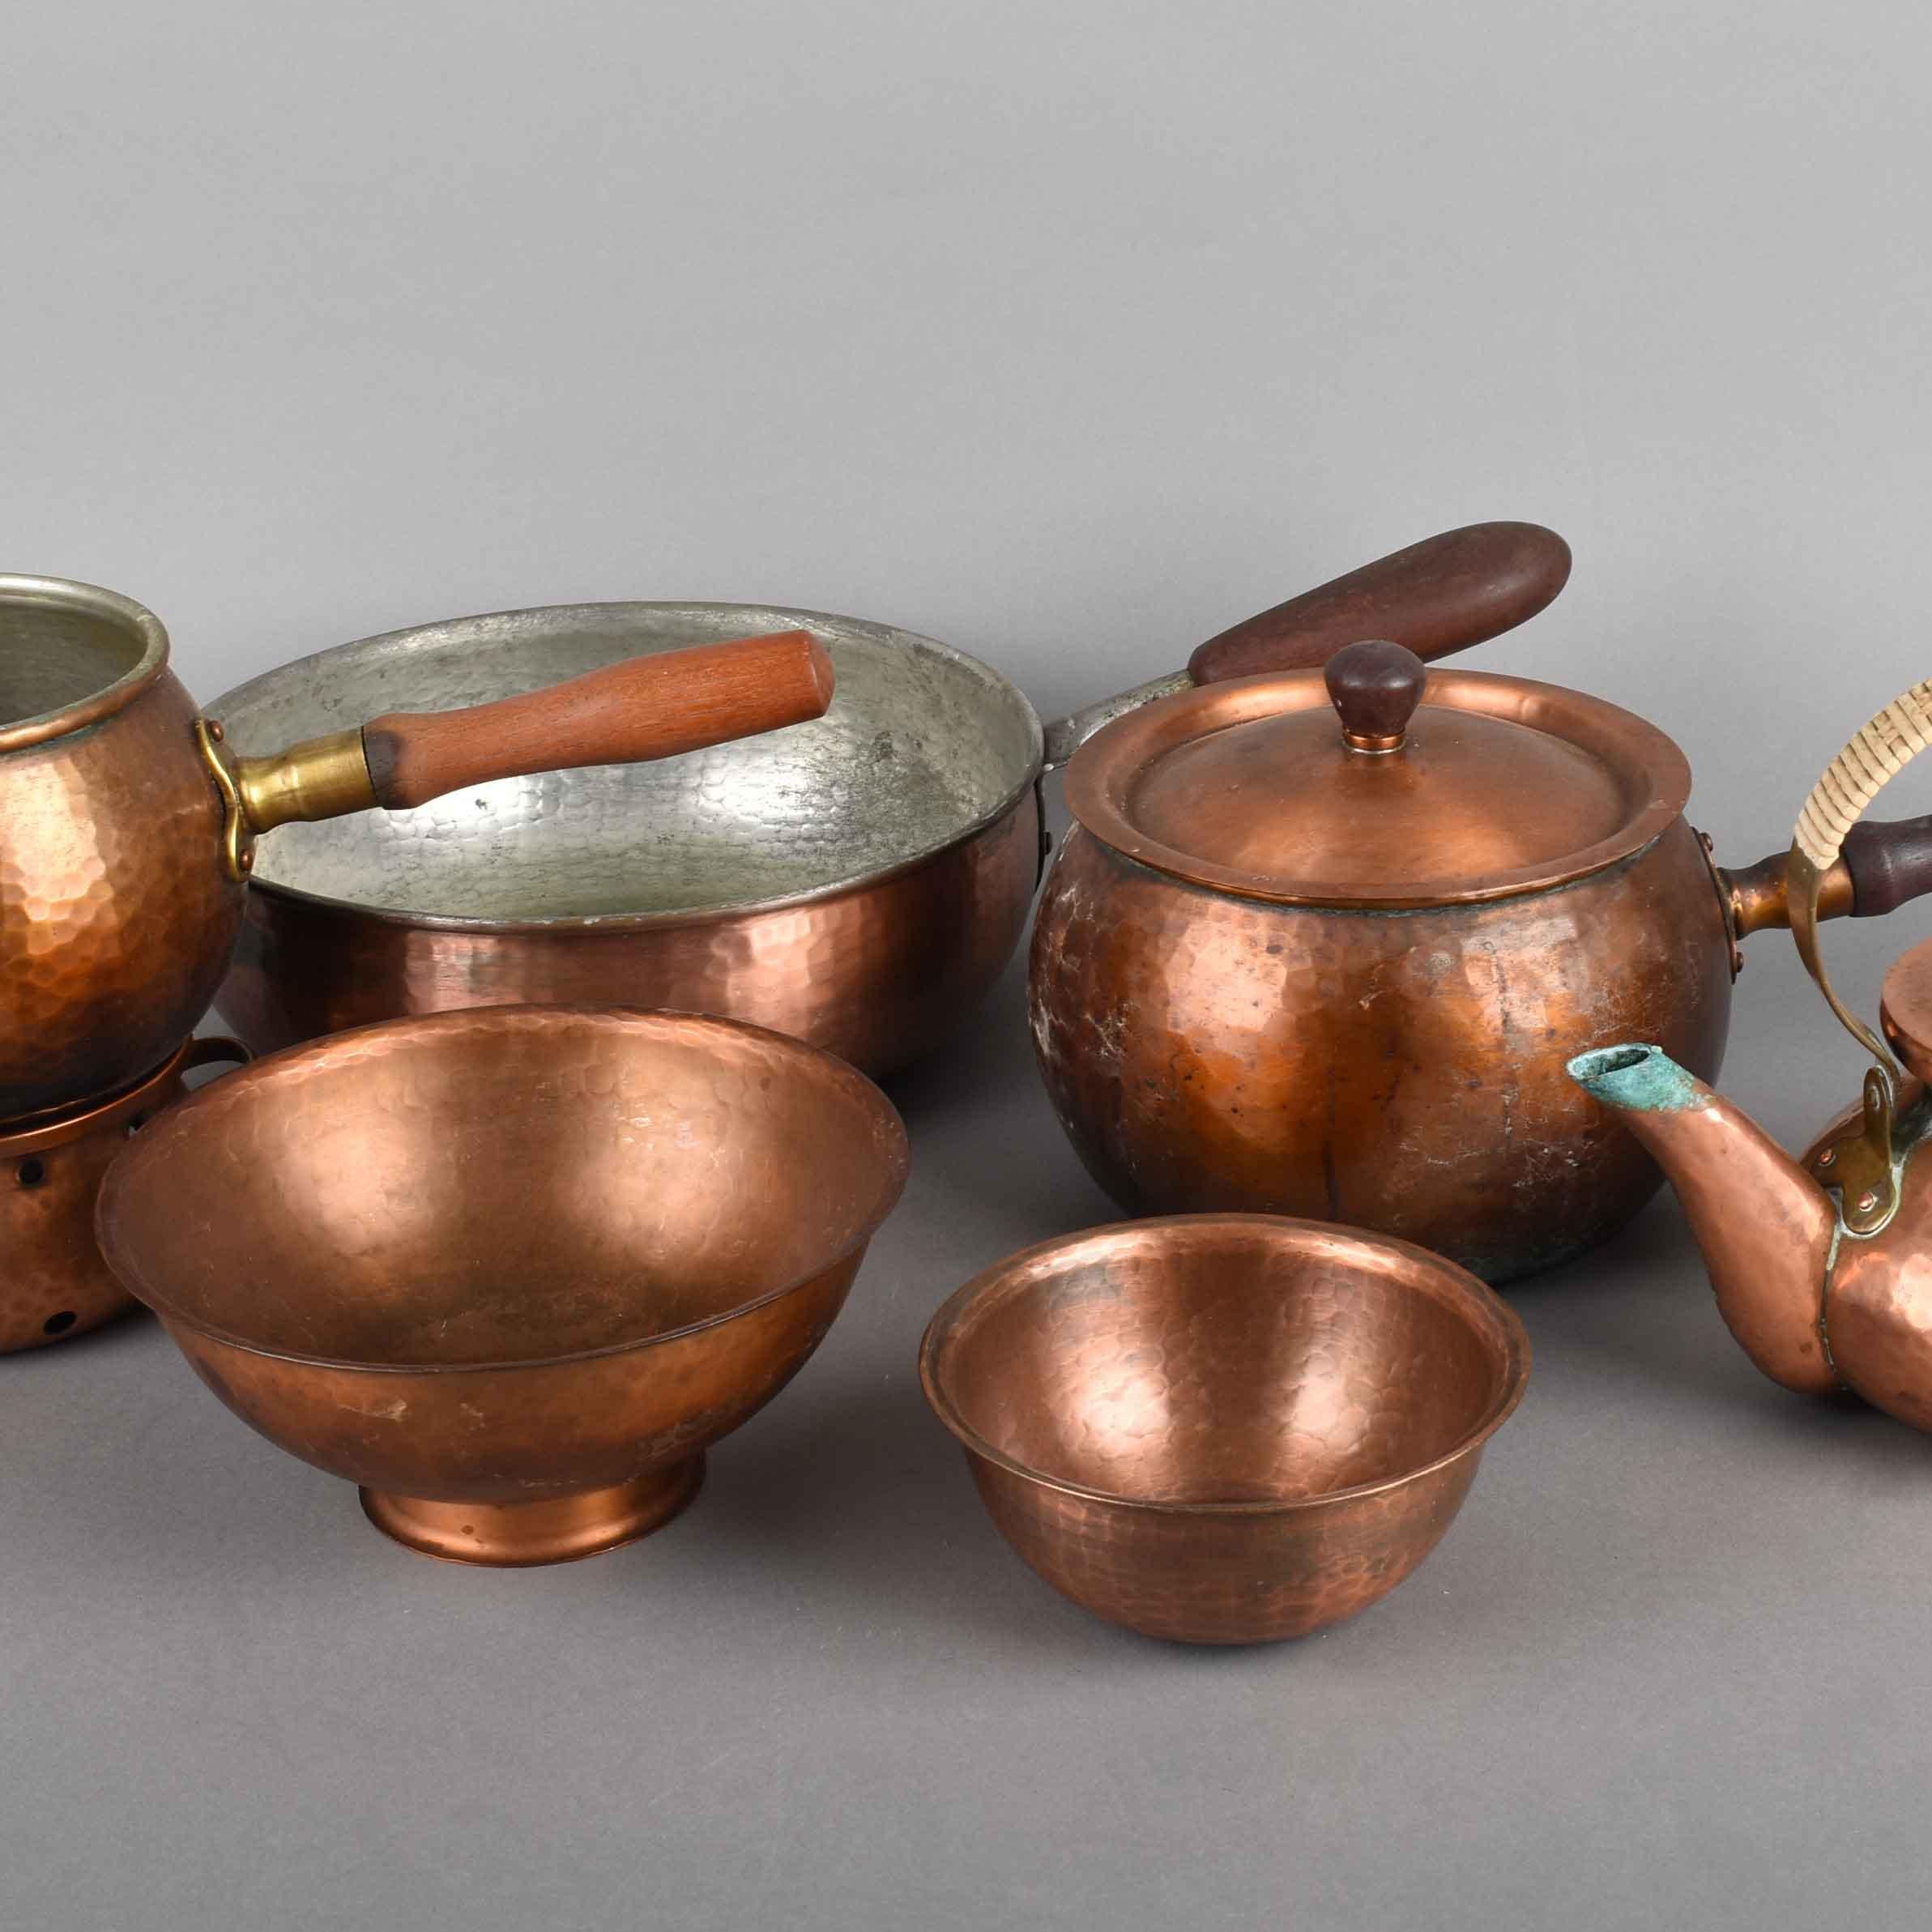 Copper set by Eugen Zint is an original decorative group of objects realized in the 1950s.

Original copper. The group includes seven pieces: two bowls in different sizes, three pots, one teapot and one kettle.

All the objects are realized in